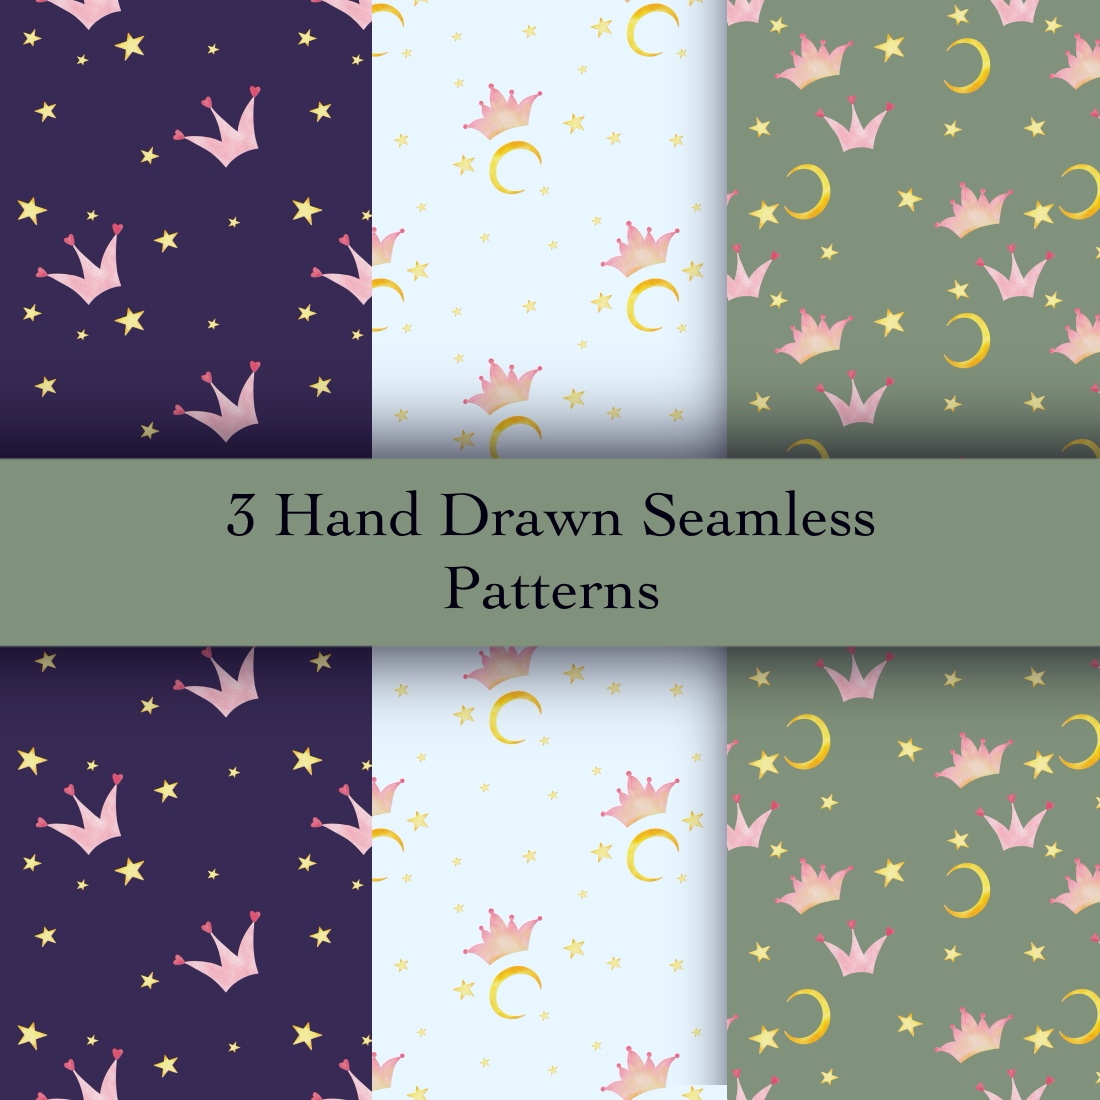 3 Hand Drawn Seamless Patterns cover image.